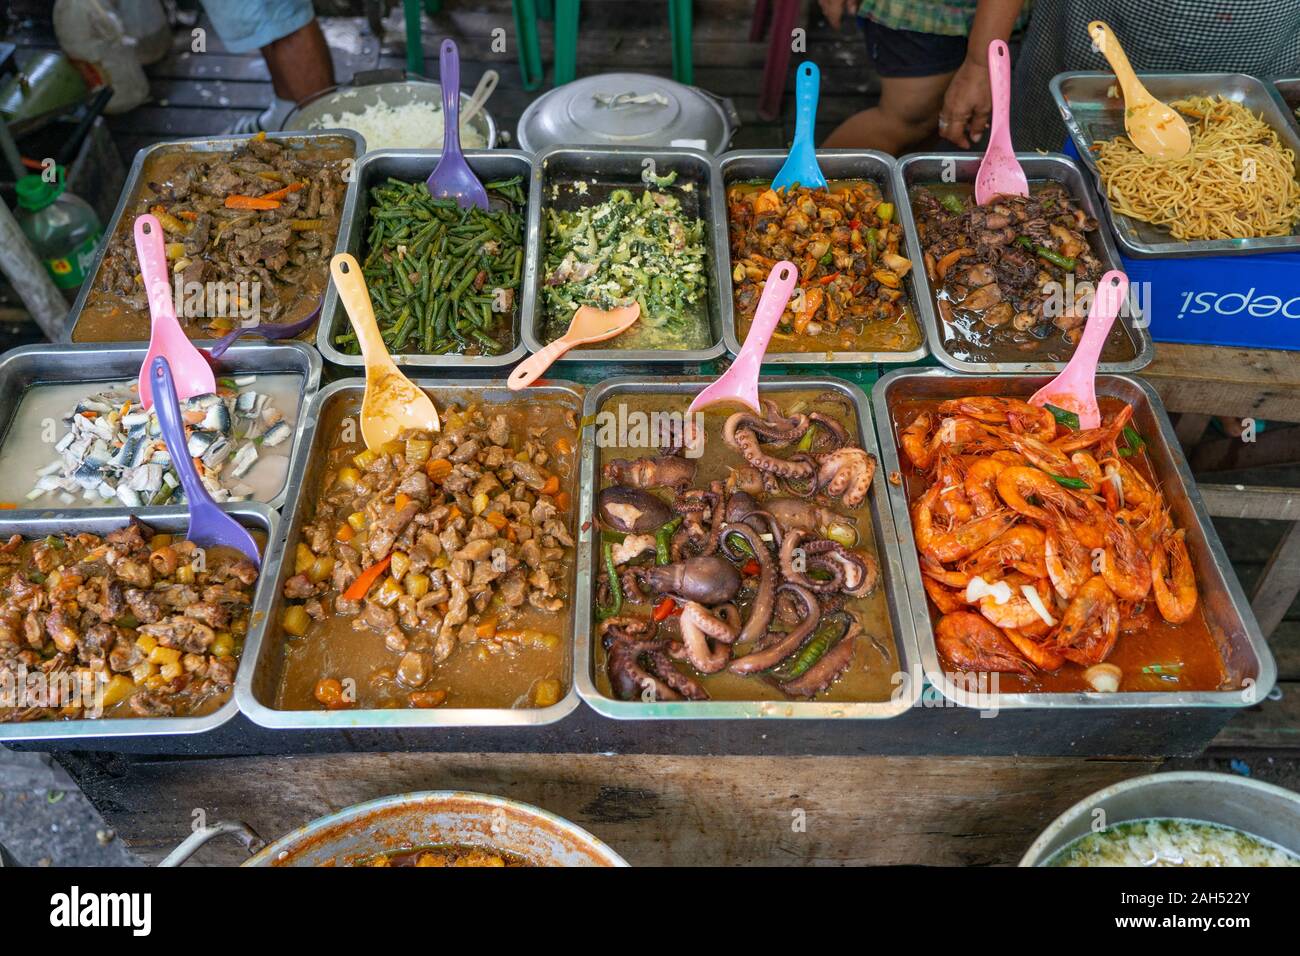 A selection of various street foods for sale at a traditional food outlet known as a Carinderia within a side street in downtown Cebu City,Philippines Stock Photo